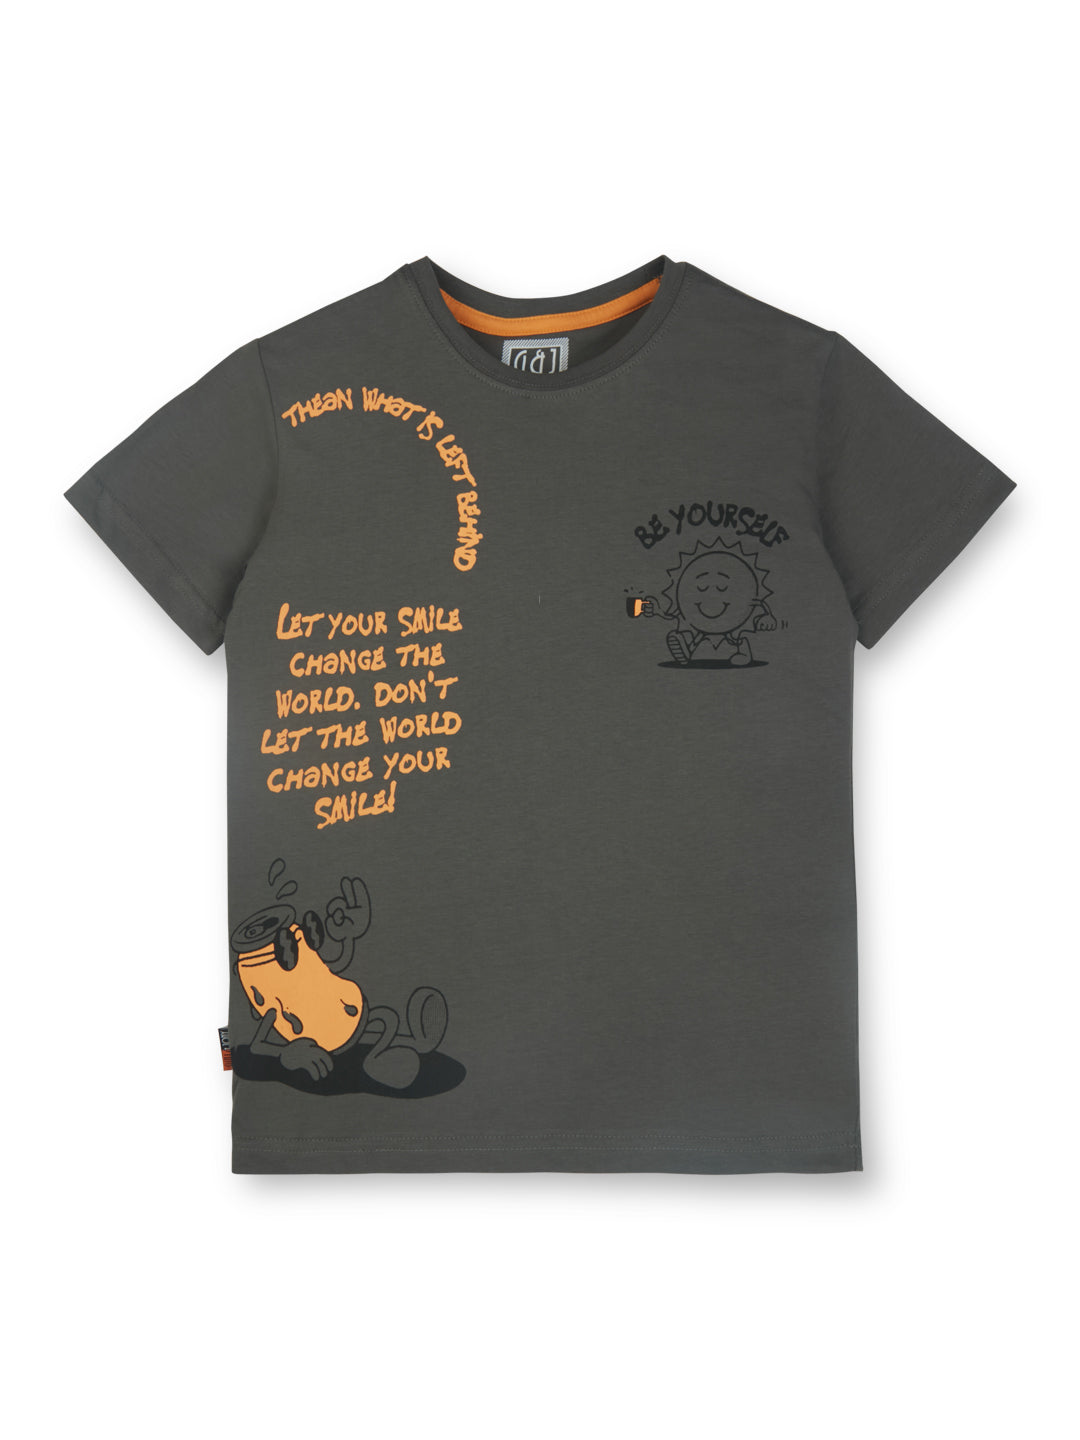 Boys Grey Round Neck Knitted Cotton Printed T-Shirt